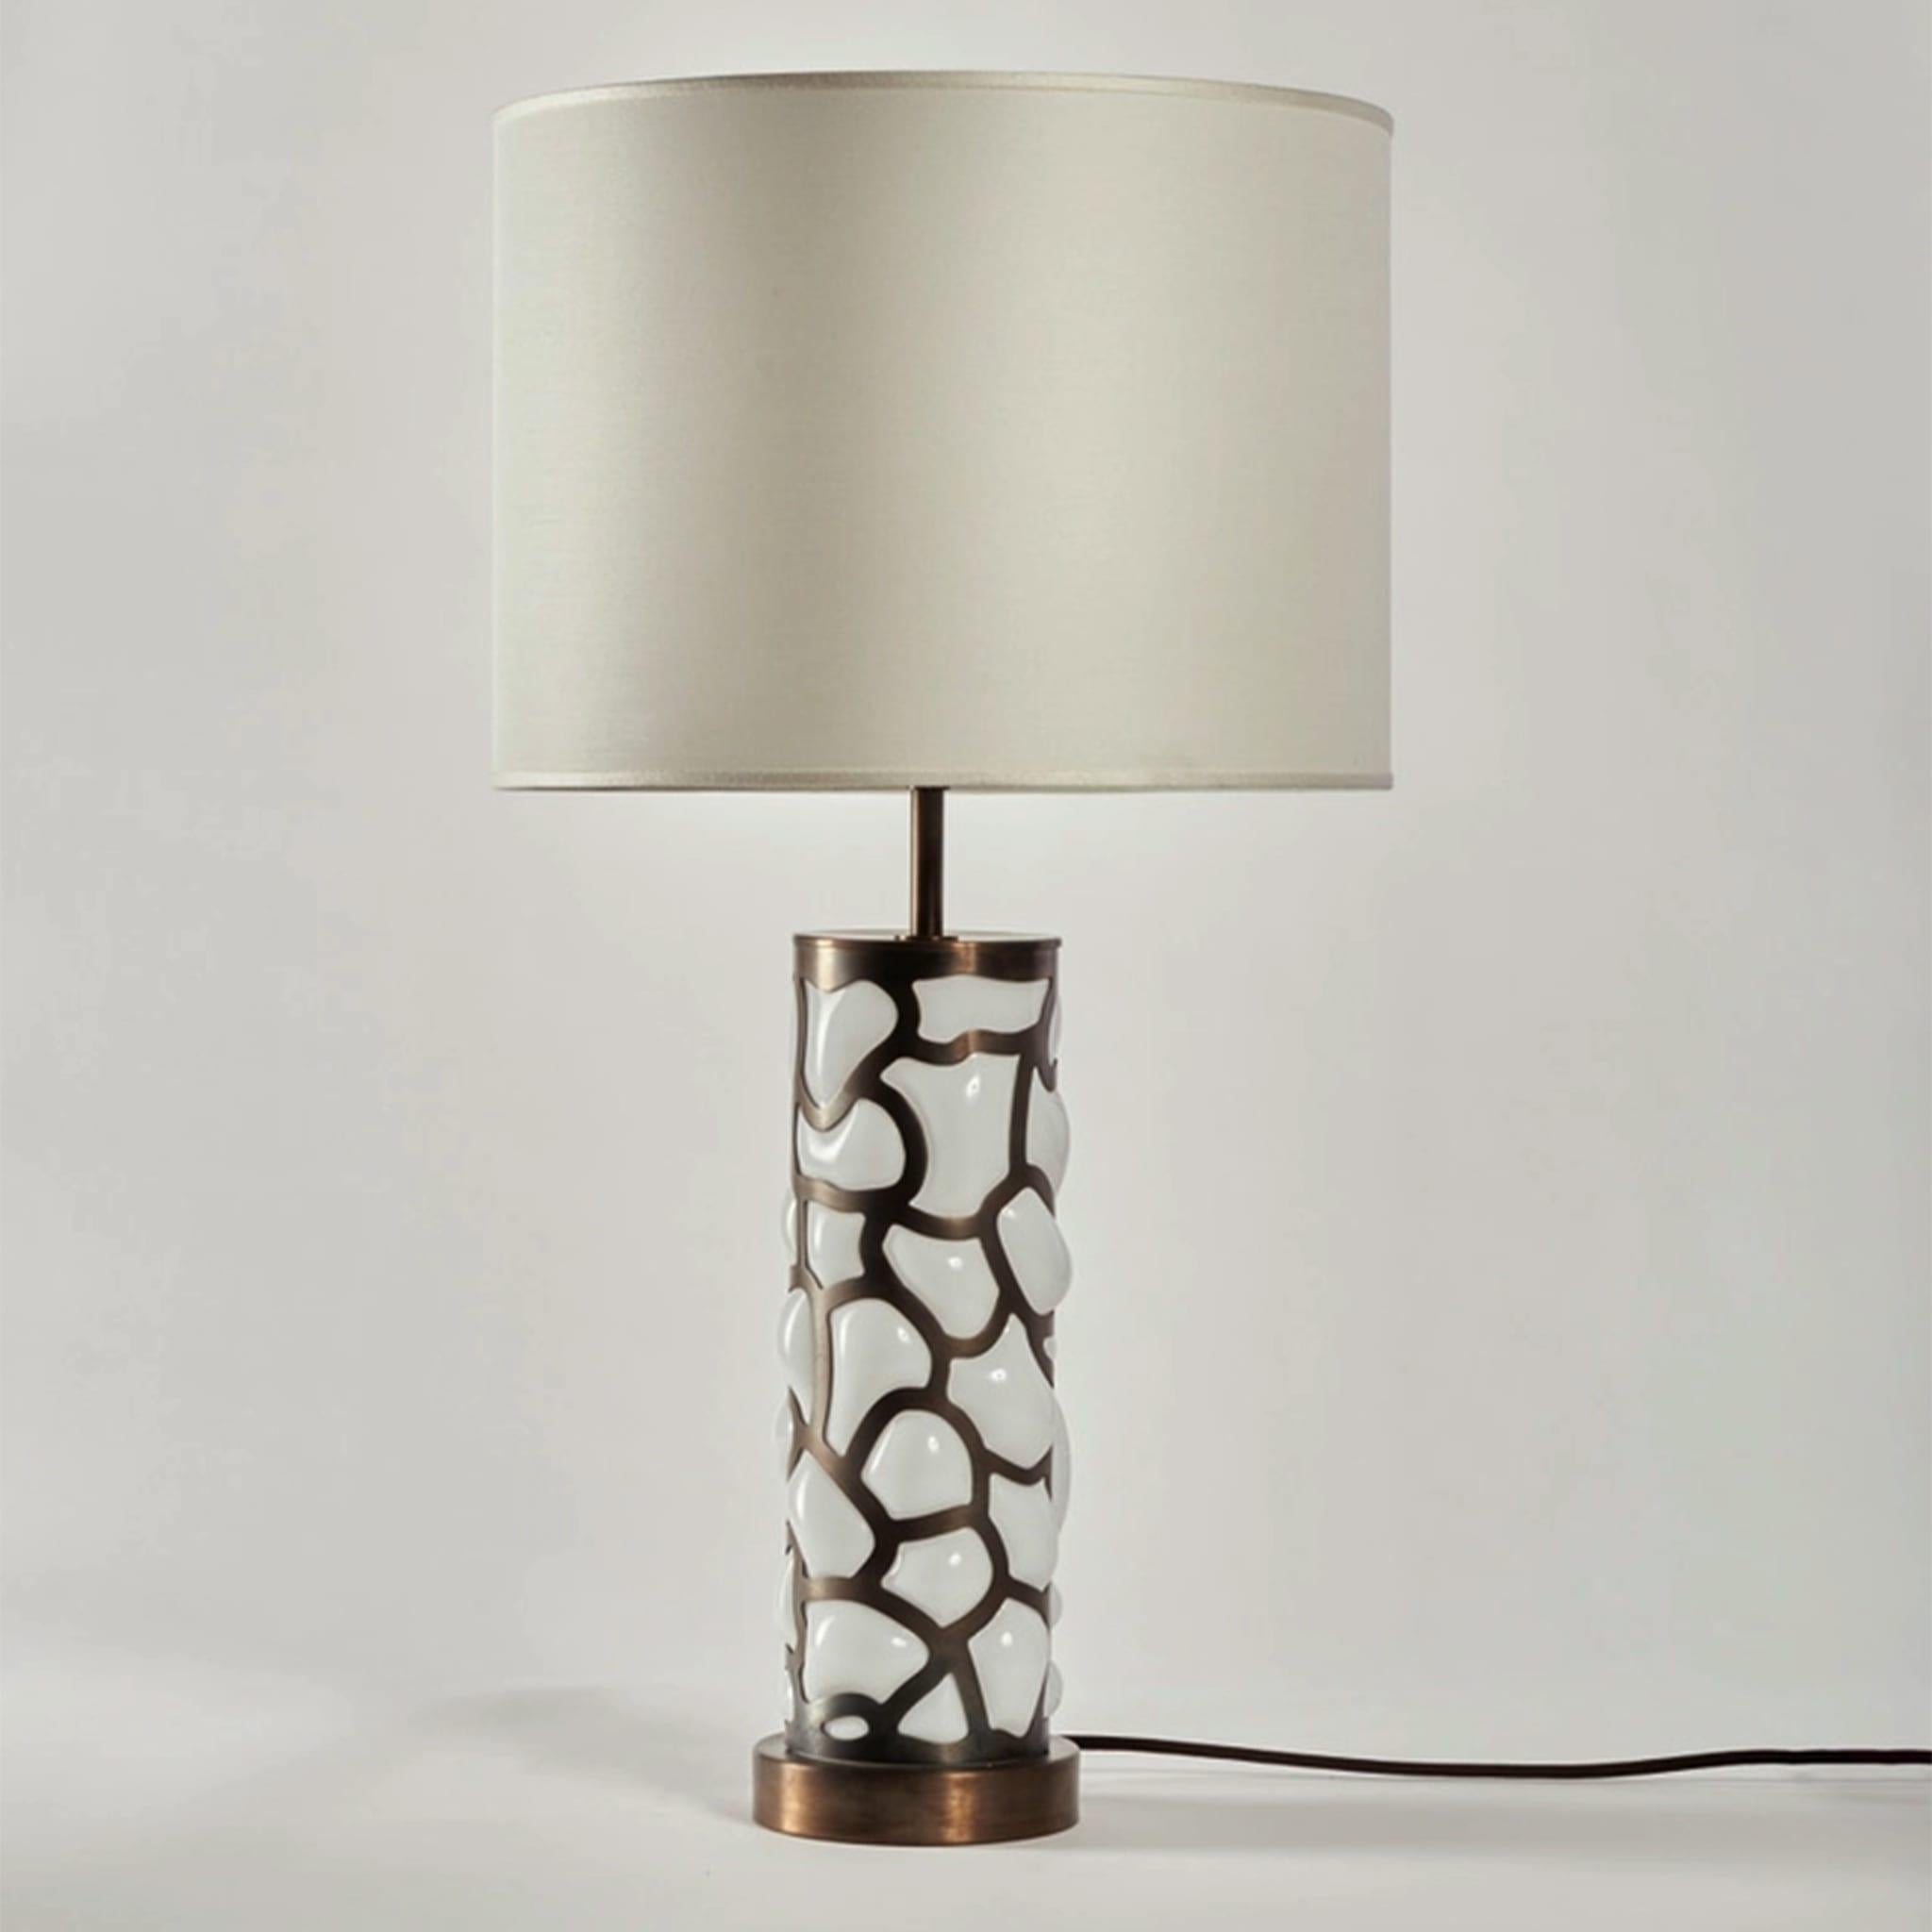 The table lamp from the Blown collection combines advanced laser cutting technologies and the thousand-year-old practice of Murano glass blowing. Its brass cage structure with a cloud pattern is complemented by Murano glass blown inside, thus